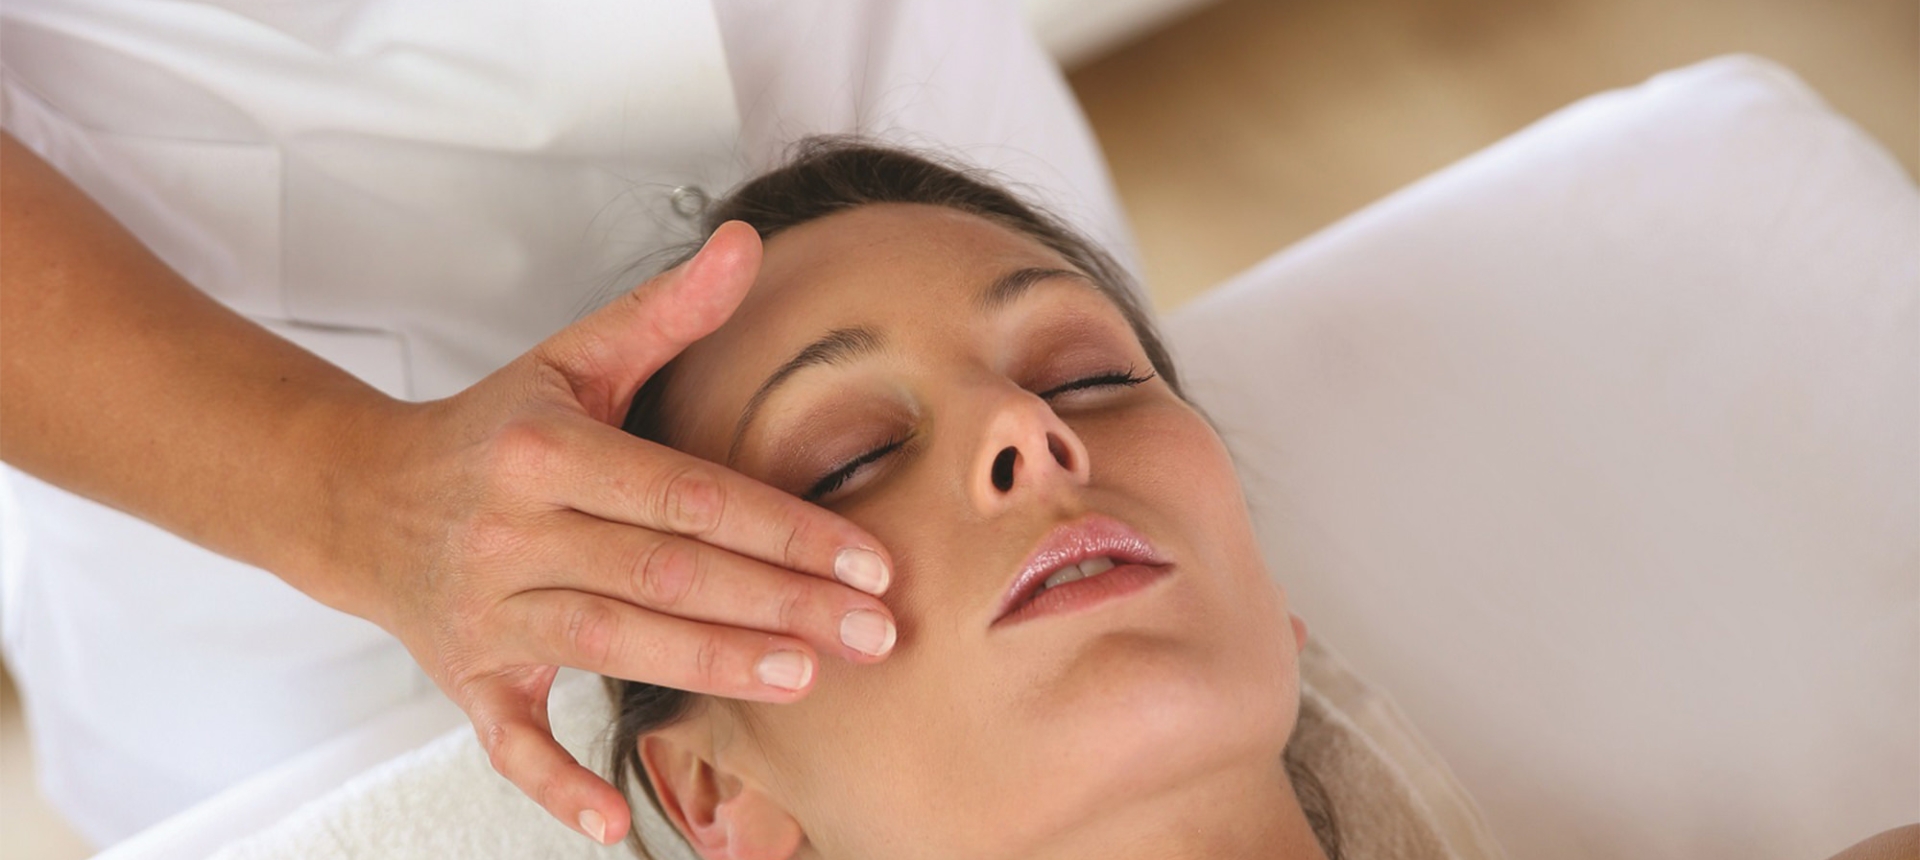 a woman at a spa getting some facial services done